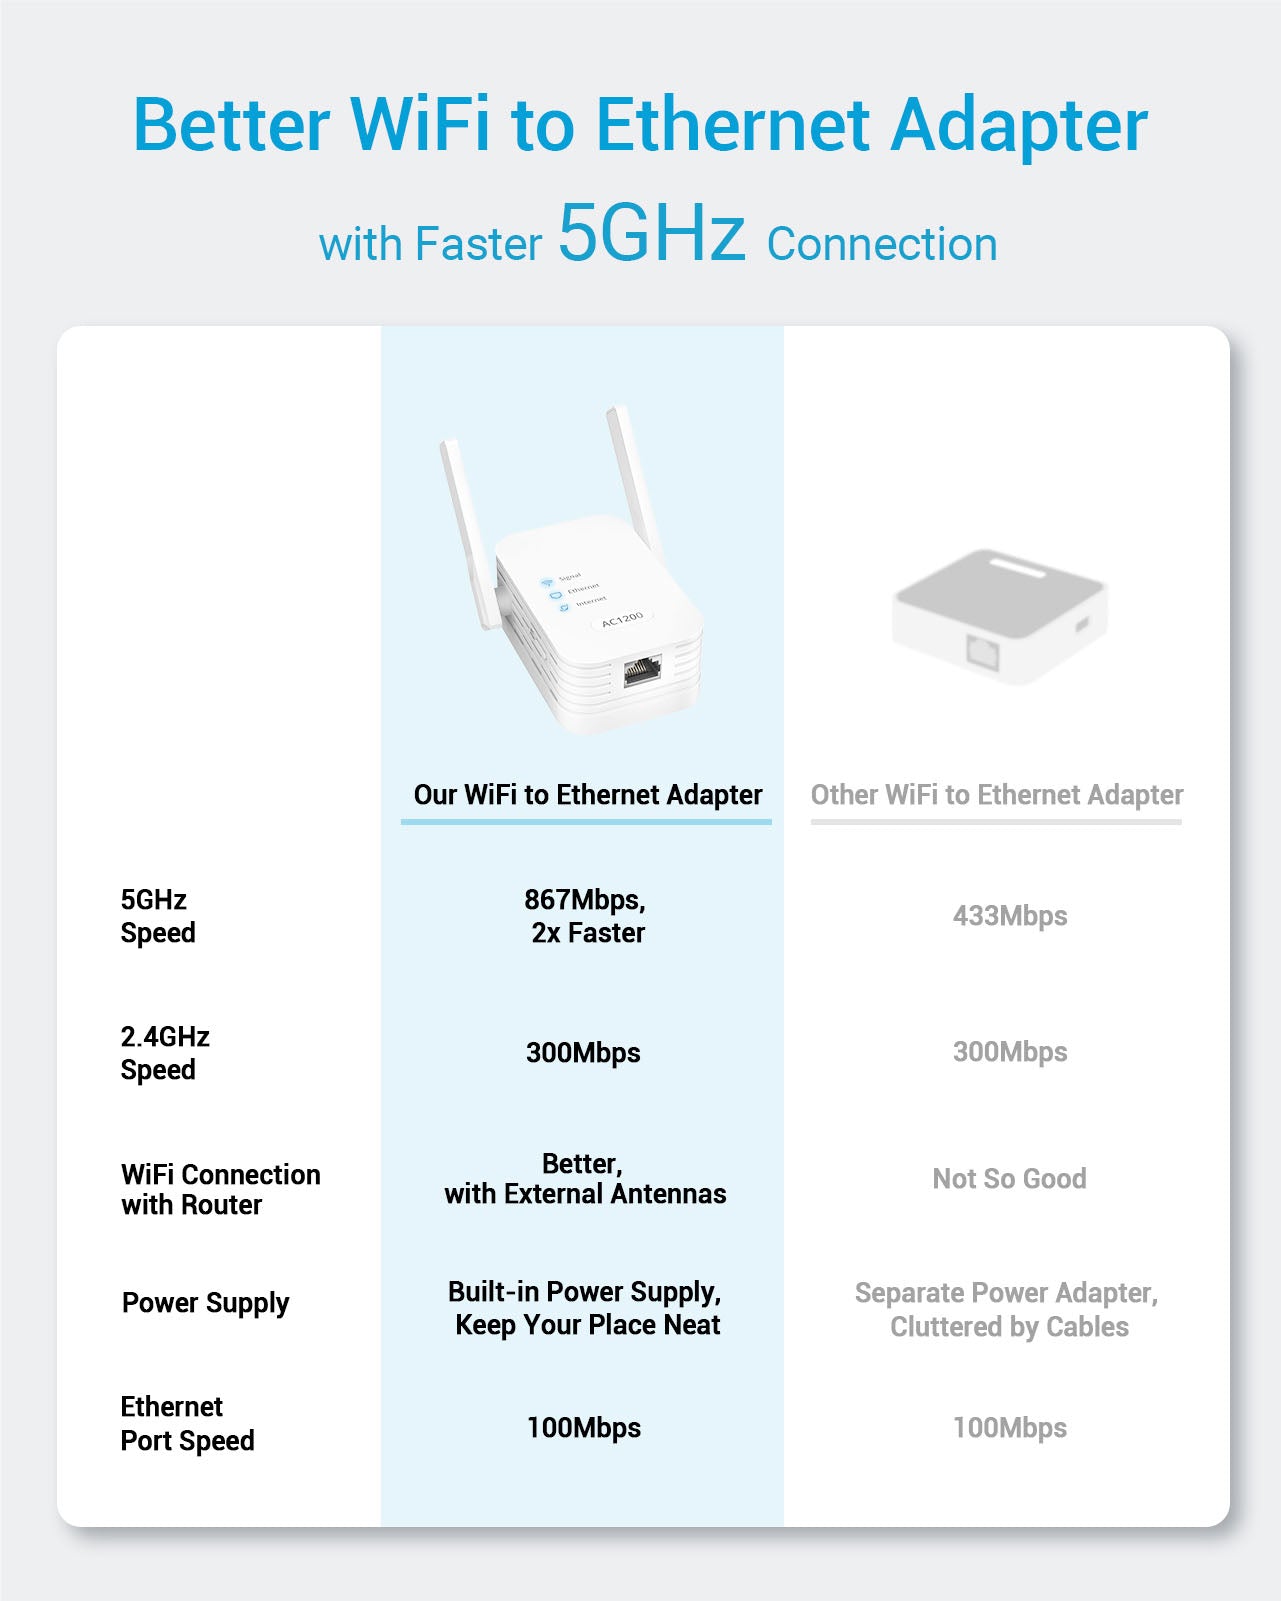 WiFi to Ethernet Adapter Comparison Chart Boosts 2x Faster Speeds on 5GHz Compared to an AC750 WiFi to Ethernet adapter